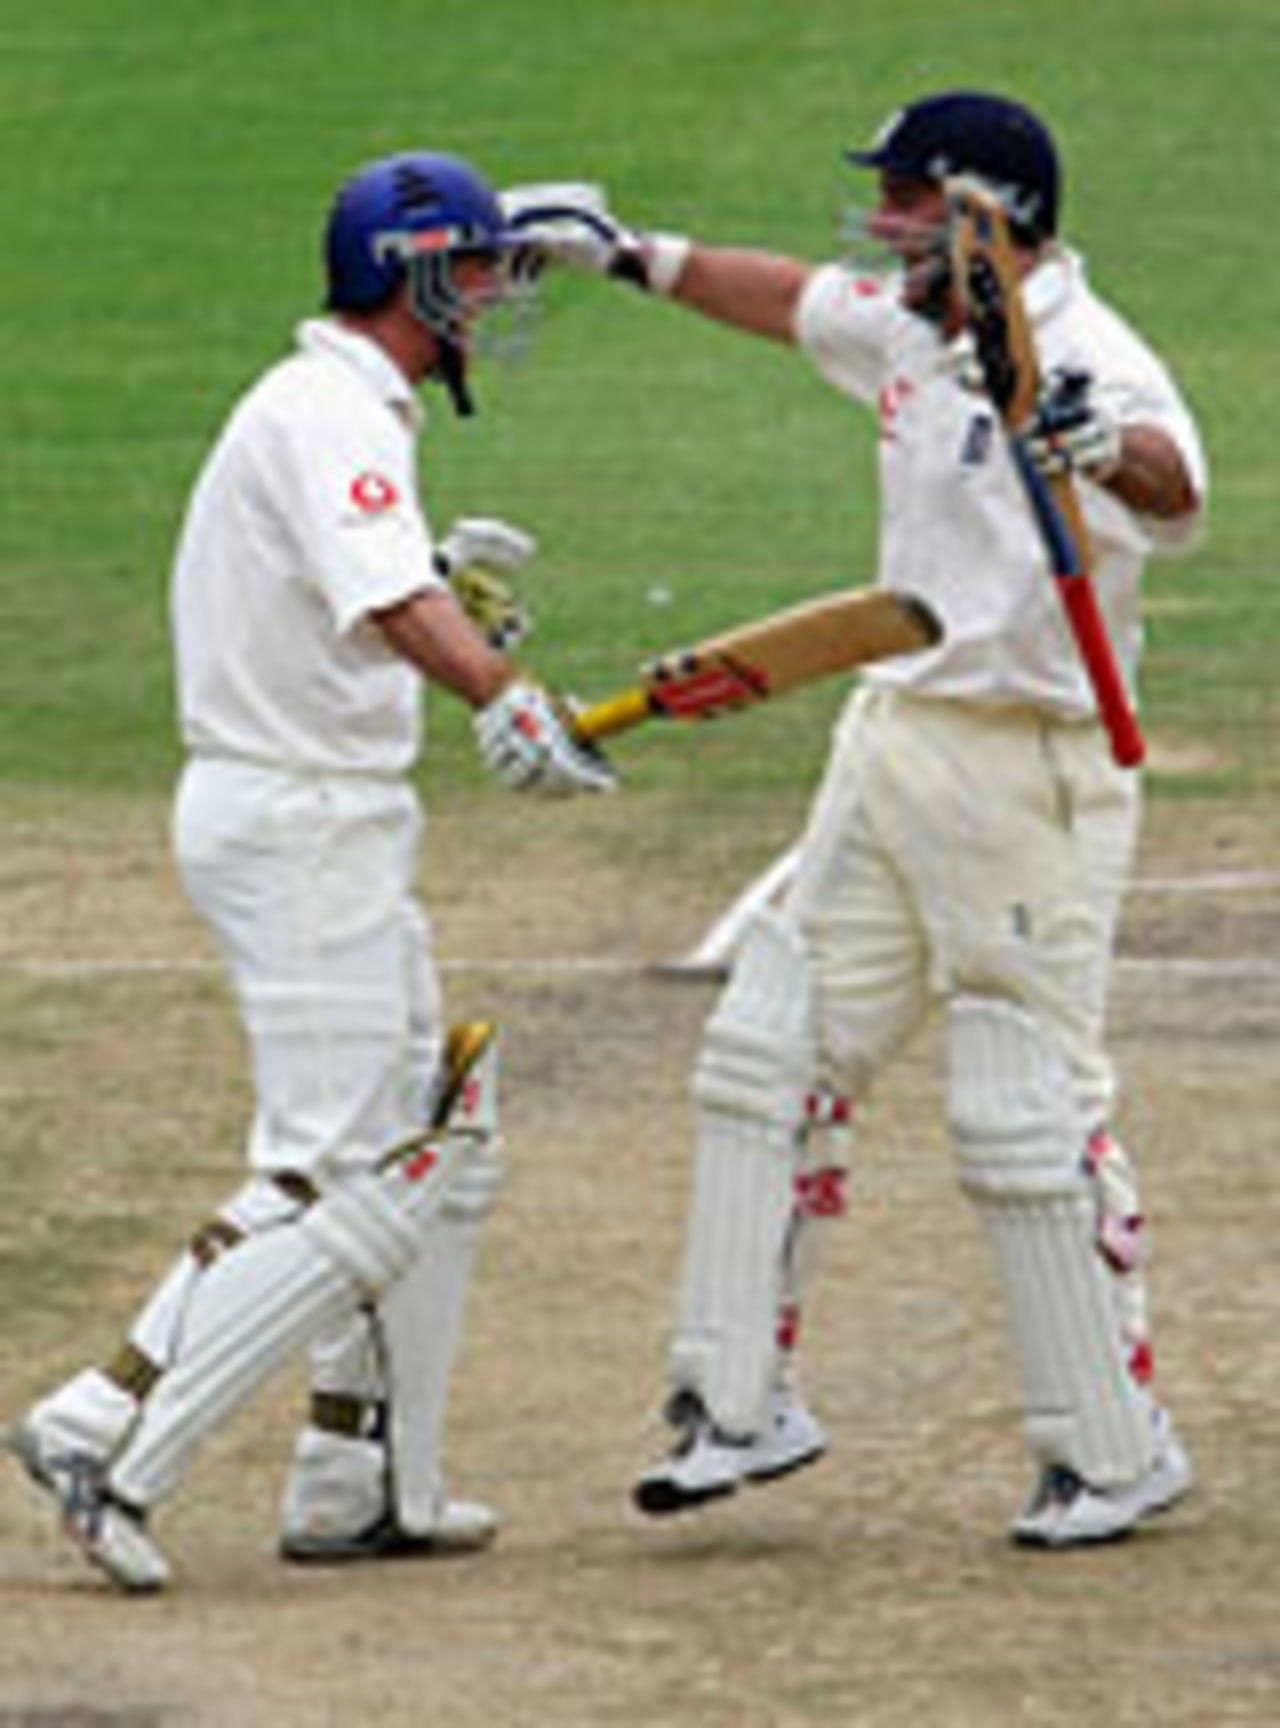 Andrew Strauss and Graham Thorpe about to embrace, South Africa v England, 1st Test, Port Elizabeth, 5th day, 21 December 2004